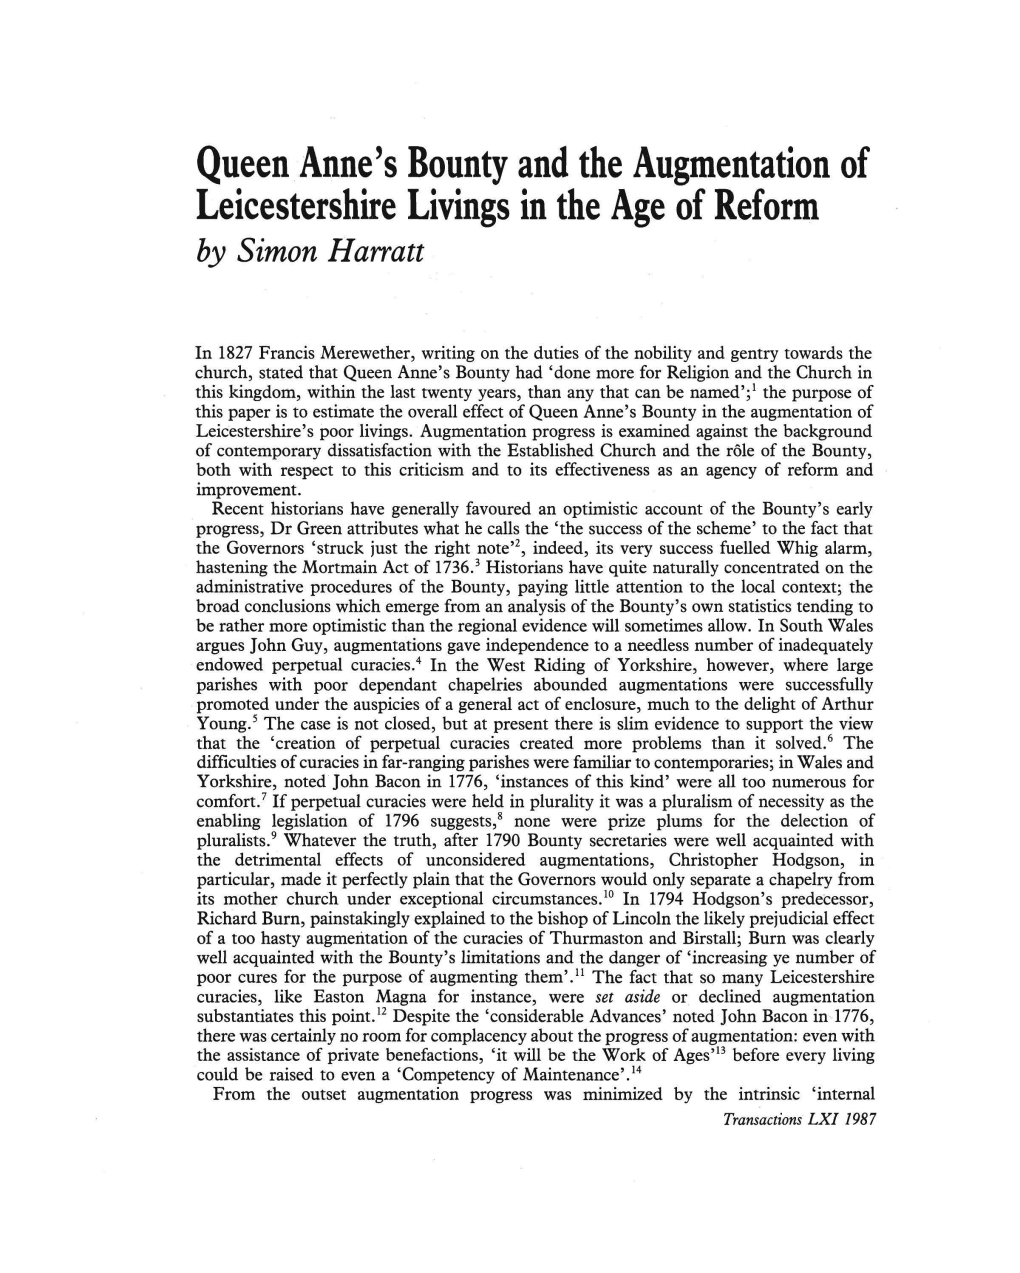 Queen Anne's Bounty and the Augmentation of Leicestershire Livings in the Age of Reform by Simon Barratt